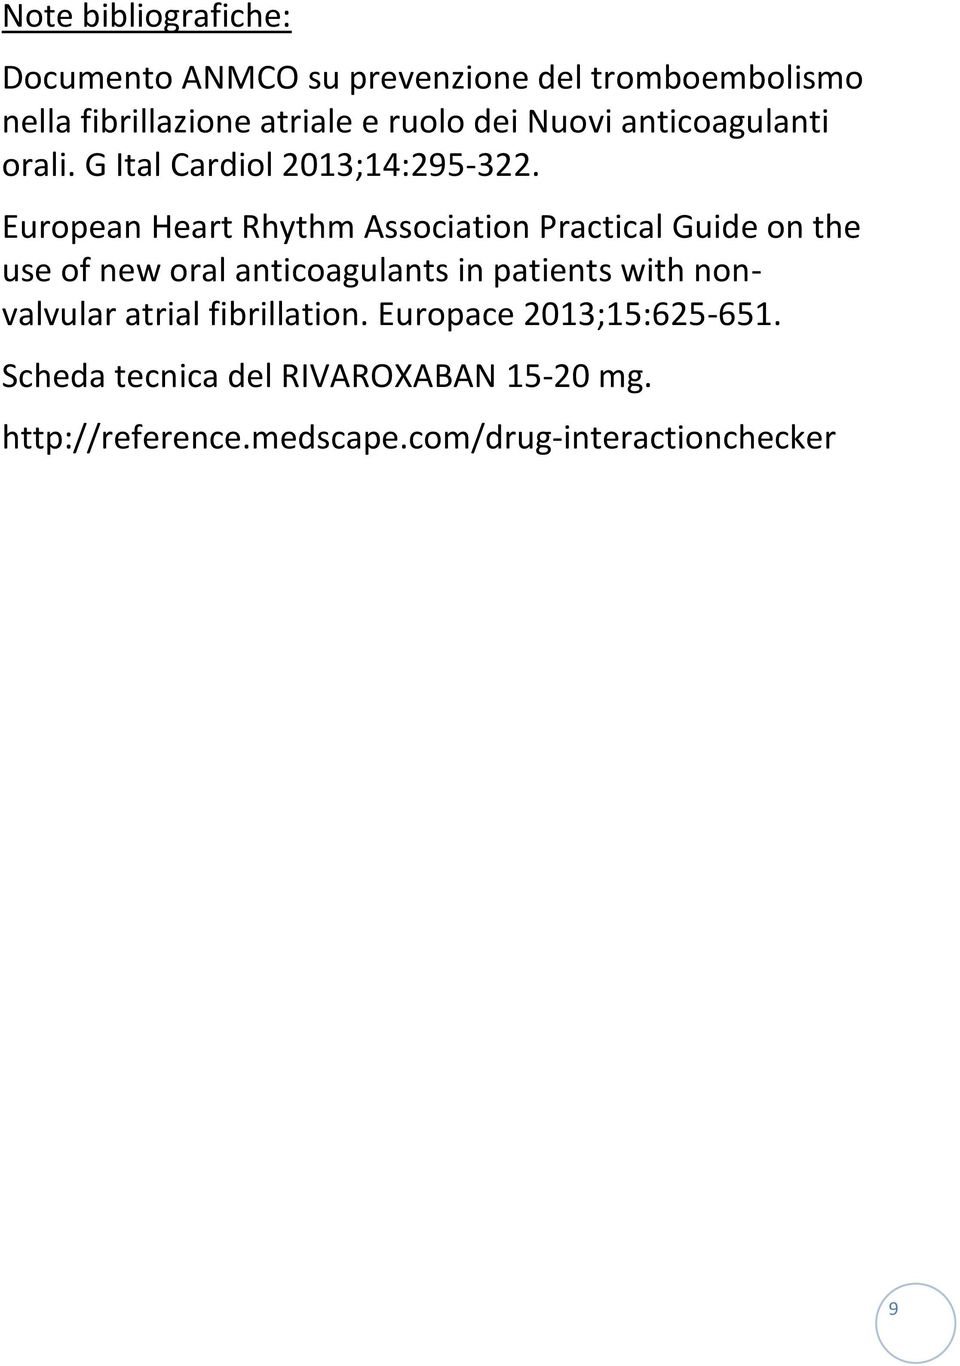 European Heart Rhythm Association Practical Guide on the use of new oral anticoagulants in patients with